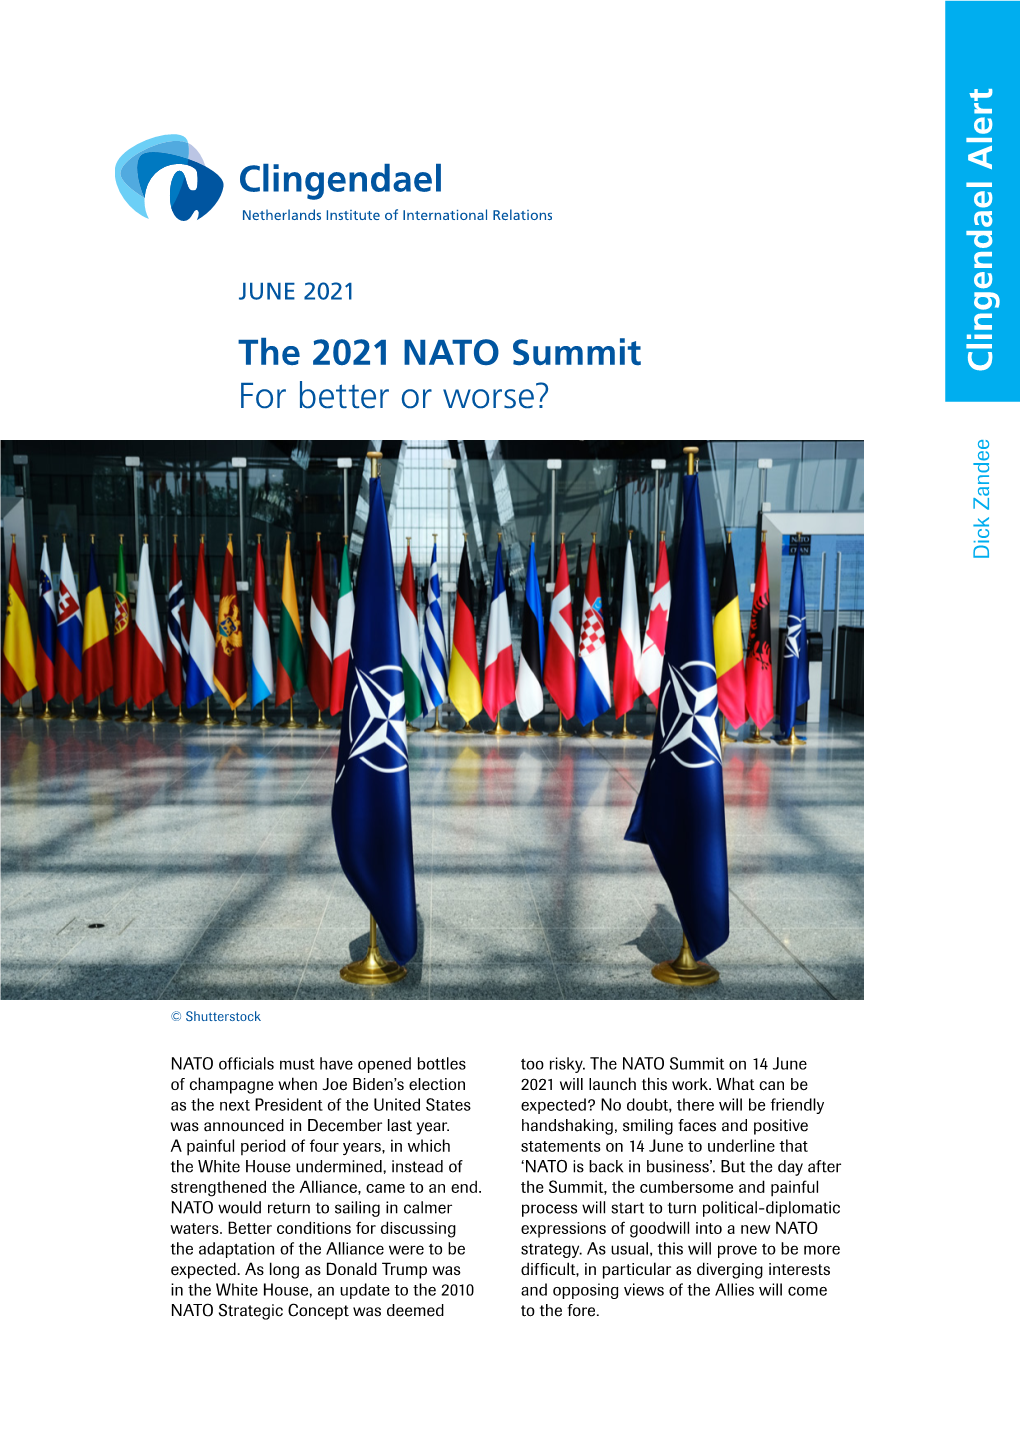 The 2021 NATO Summit for Better Or Worse?